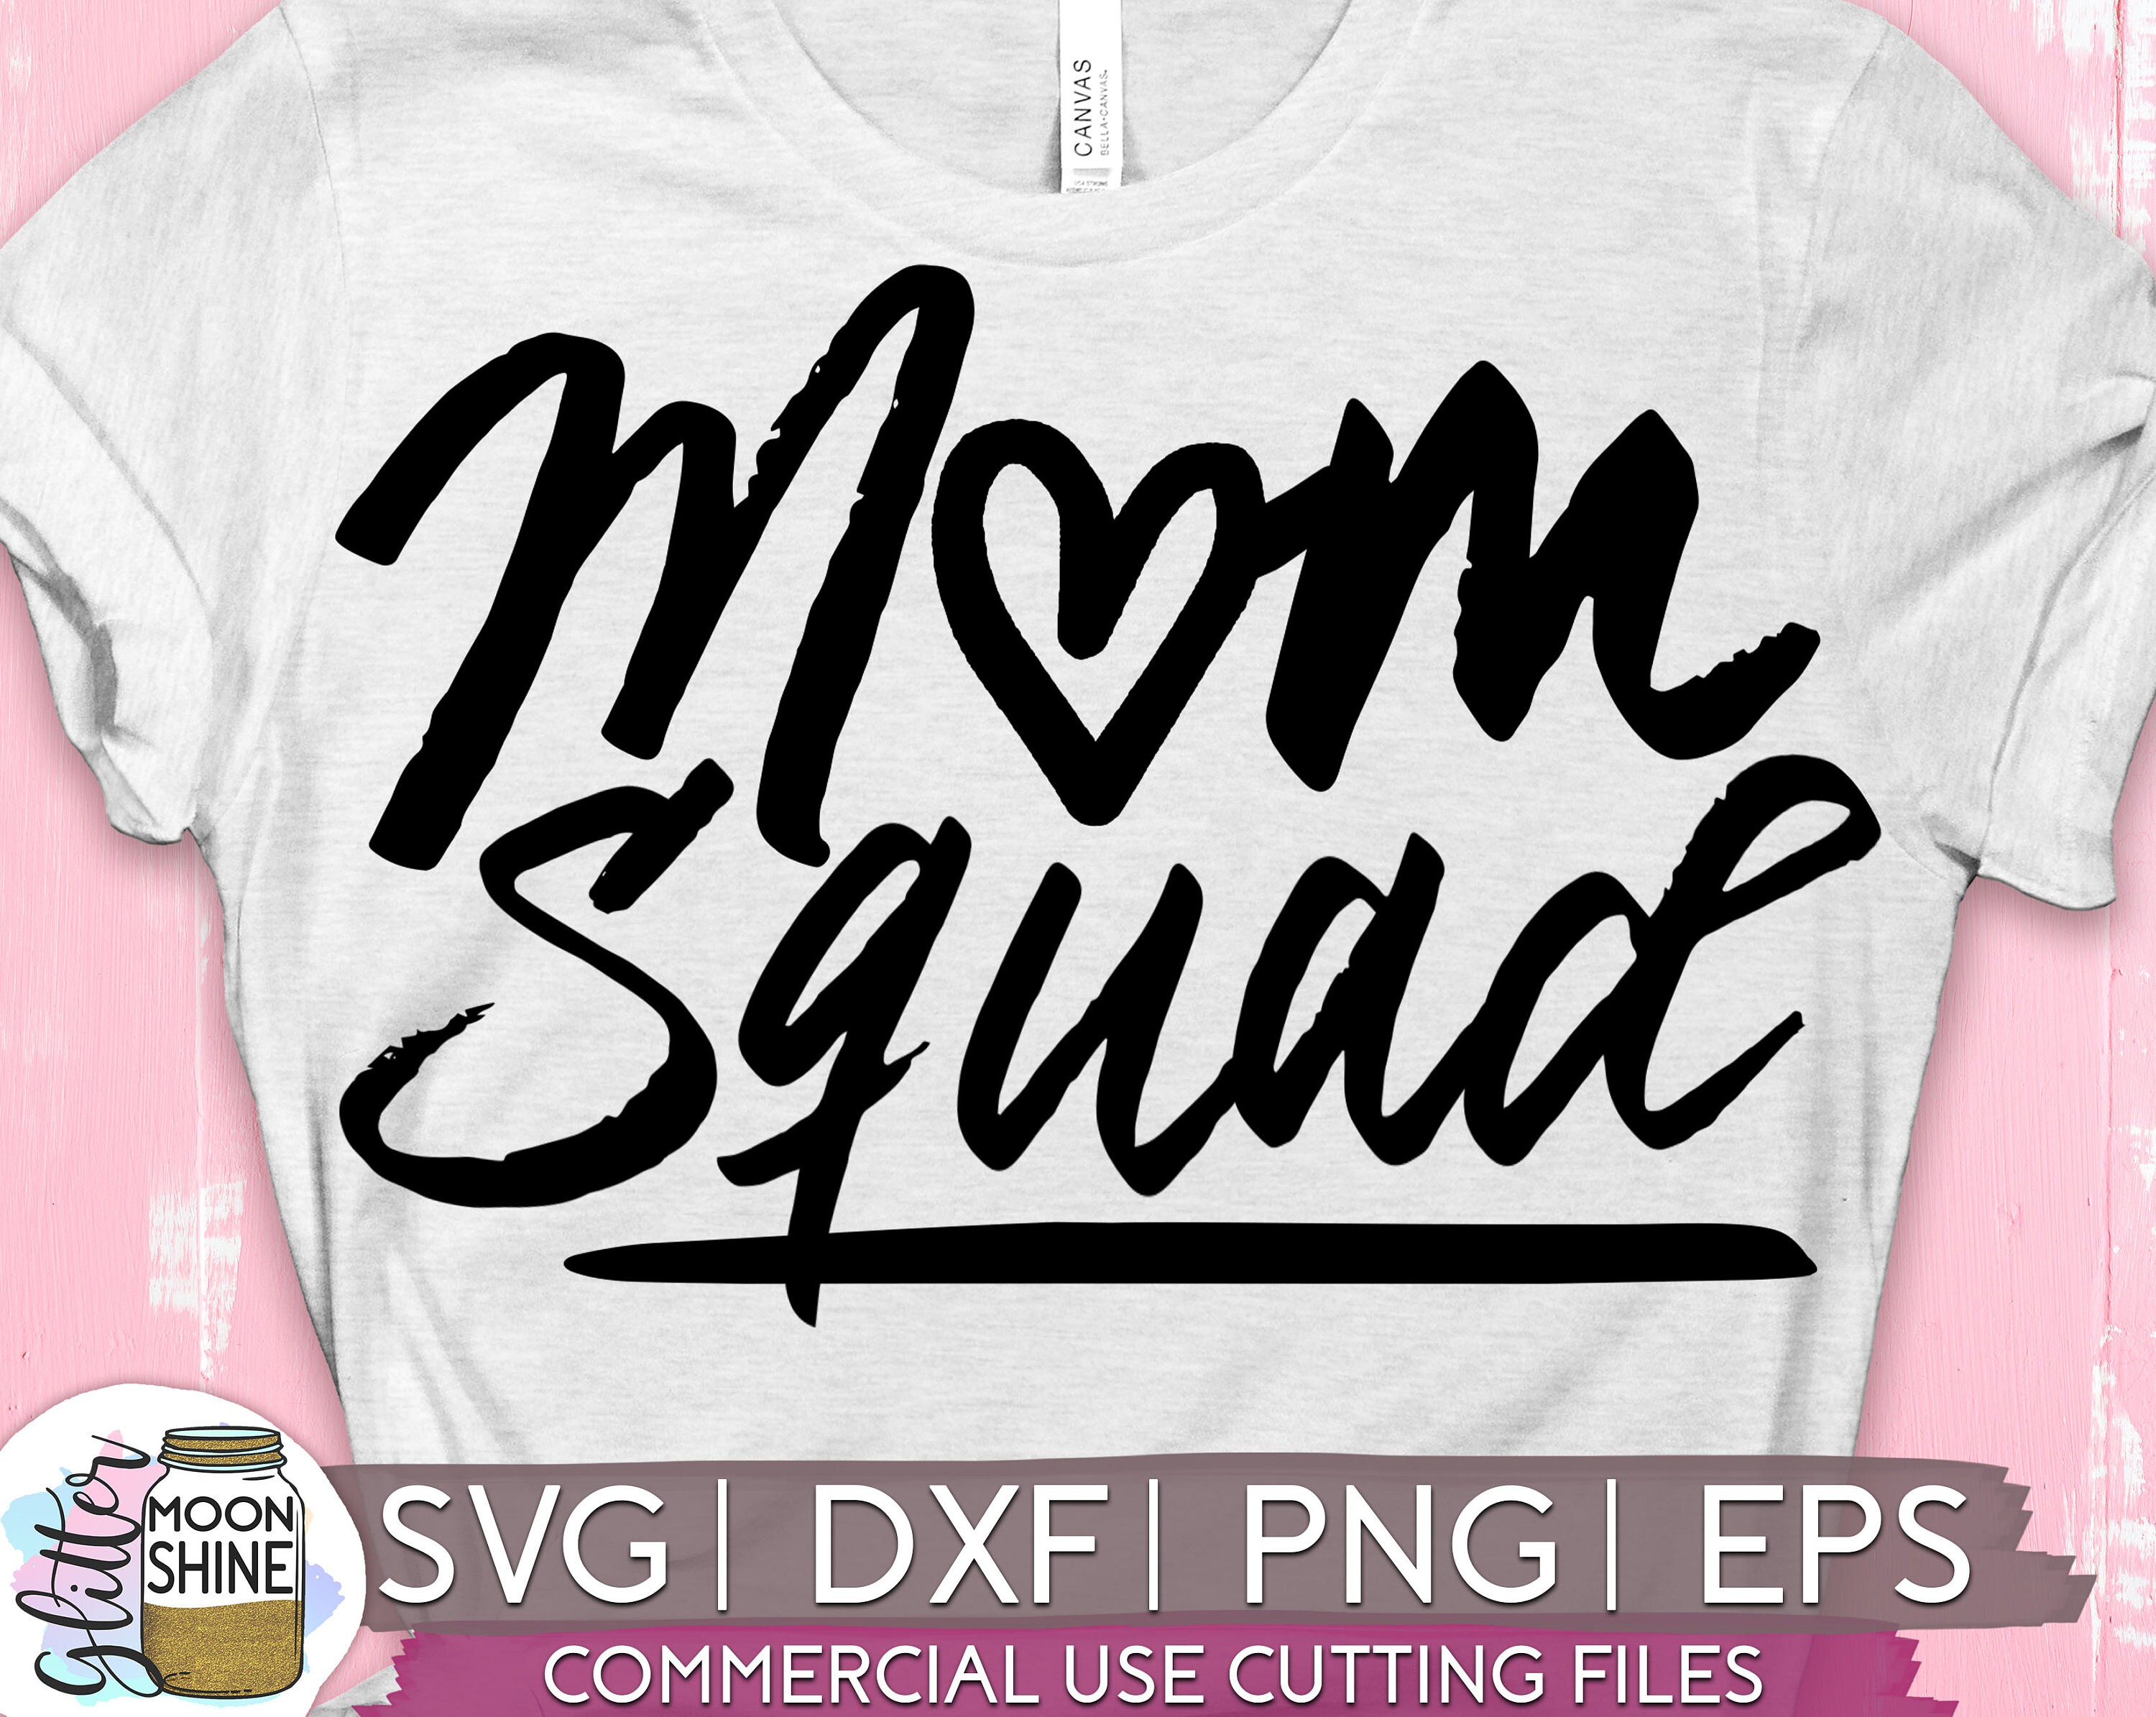 Svg Dxf Instant Download Coffee Mom Wine Repeat Funny Cute Mother/'s Day T-Shirt Design Digital Files Png Cricut files,Clip Art Eps